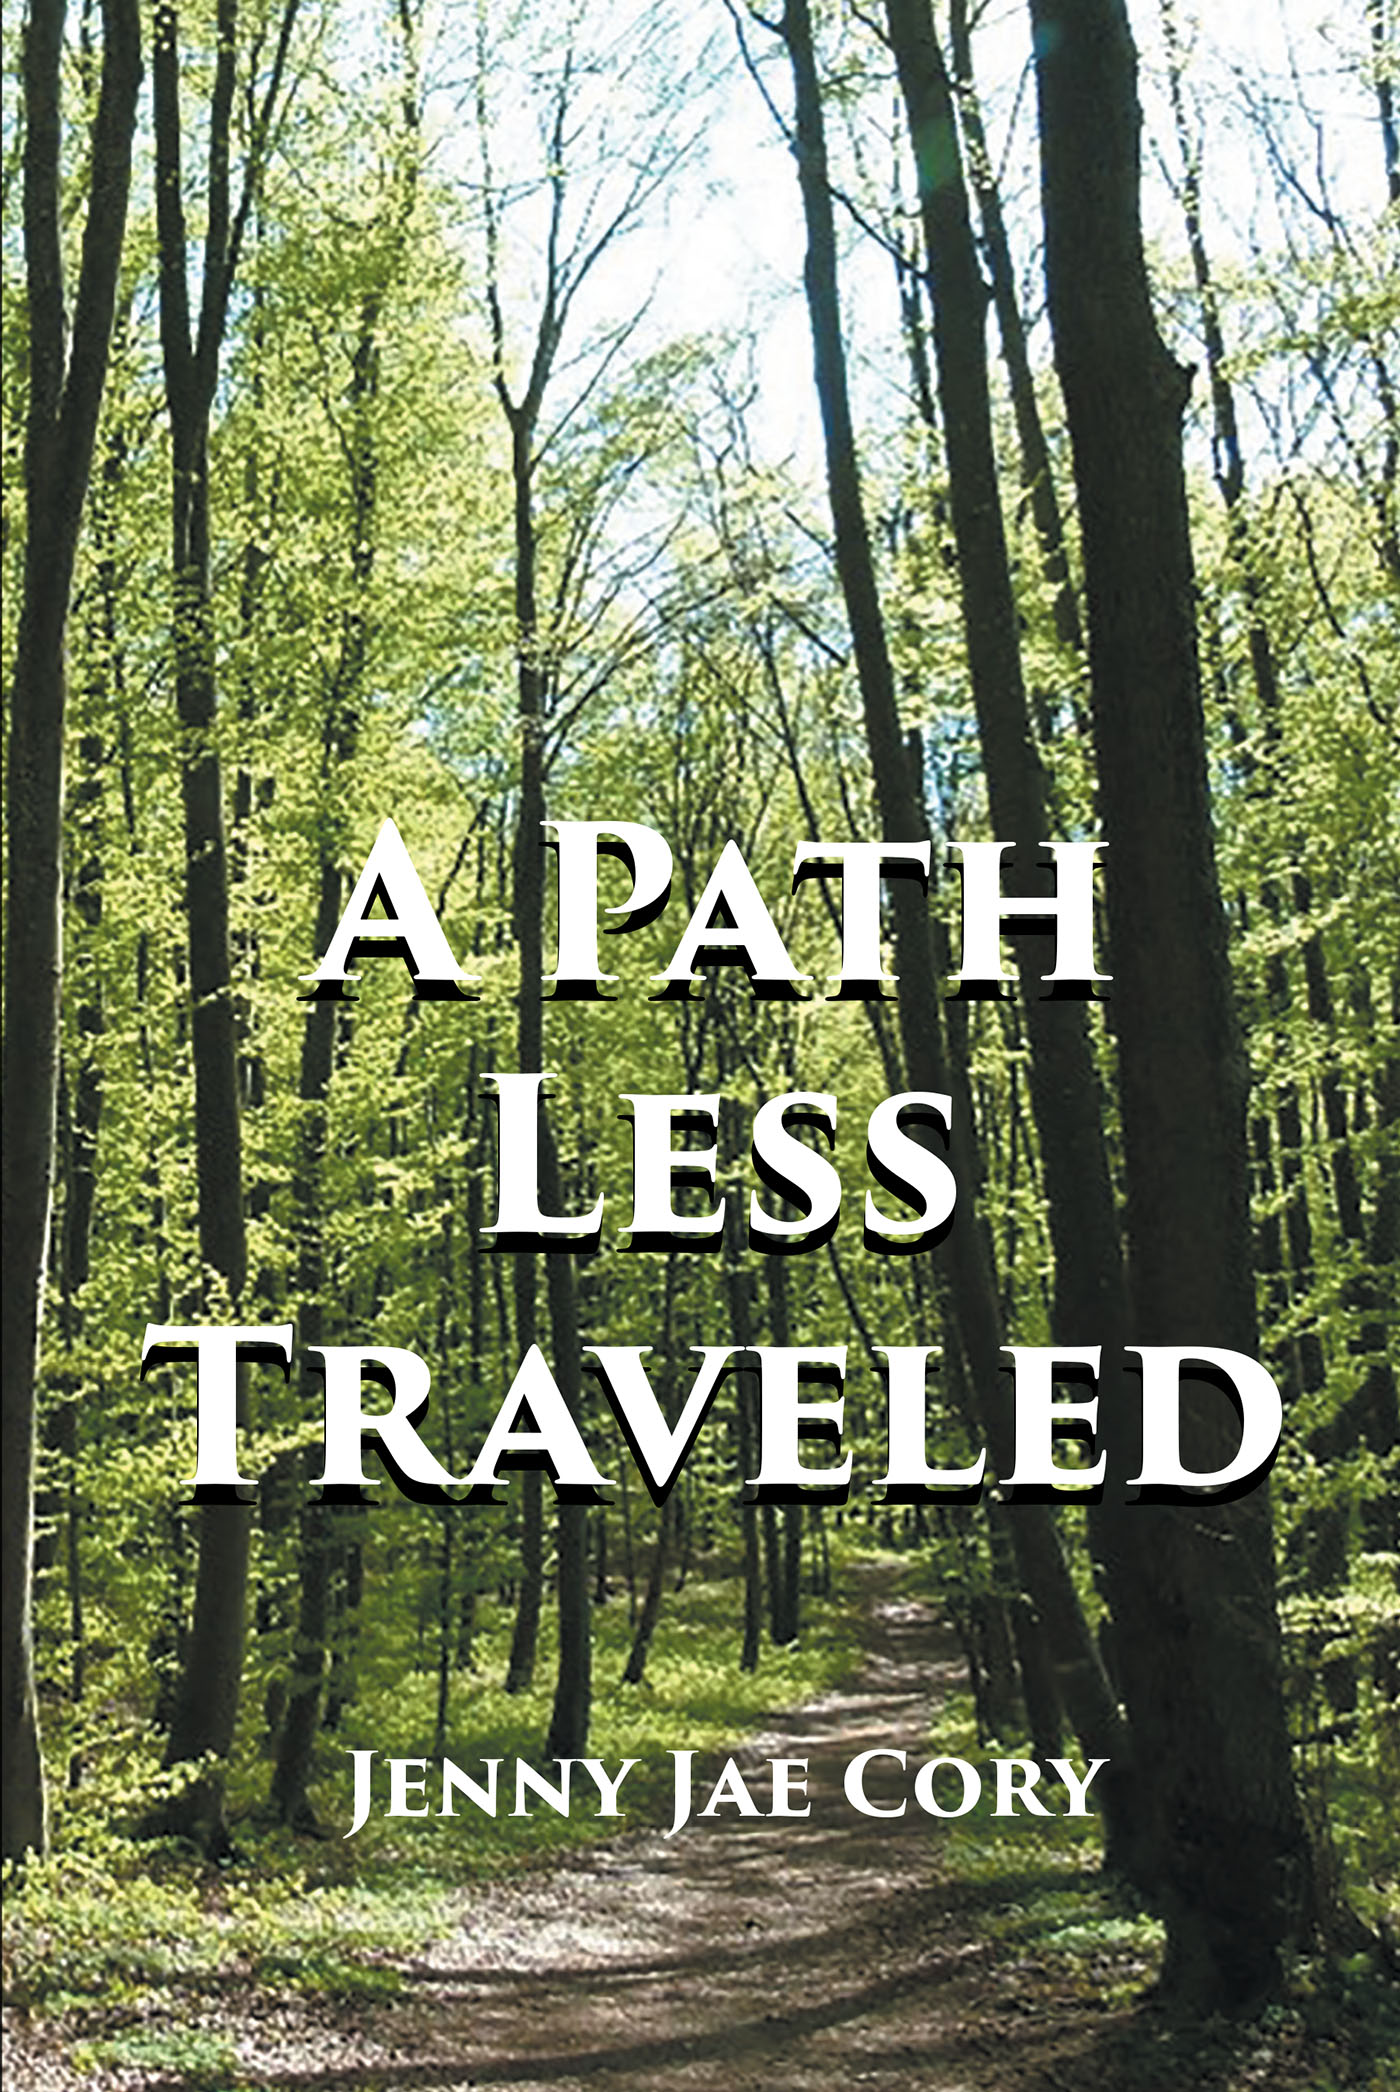 Author Jenny Cory’s New Book, "A Path Less Traveled," Follows the Author as She Chooses the Difficult Choice to Come Out as a Transgender Woman in Her Rural Community